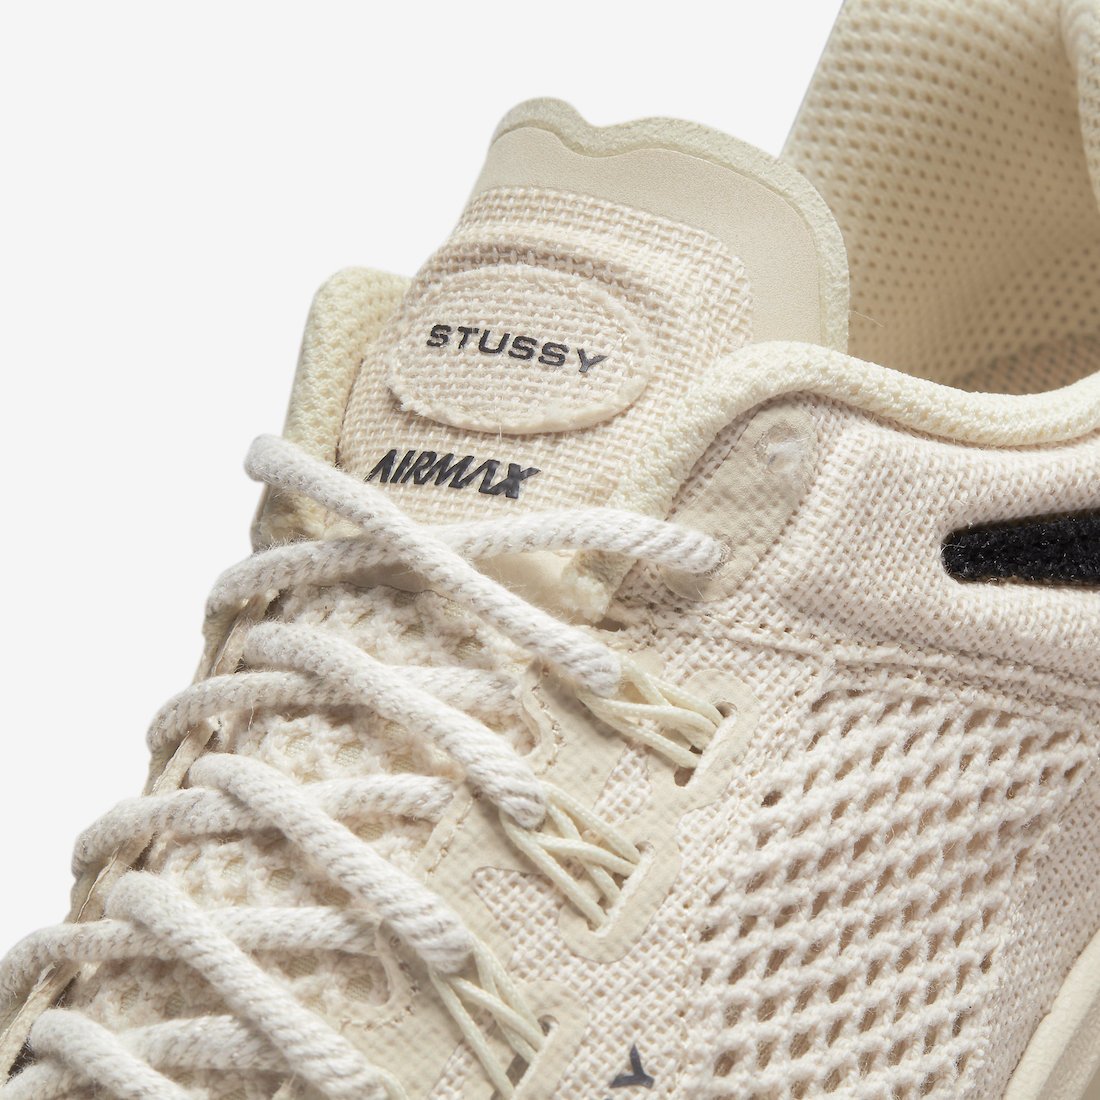 Stussy Nike Air Max 2015 Fossil DM6447-200 Release Date Info